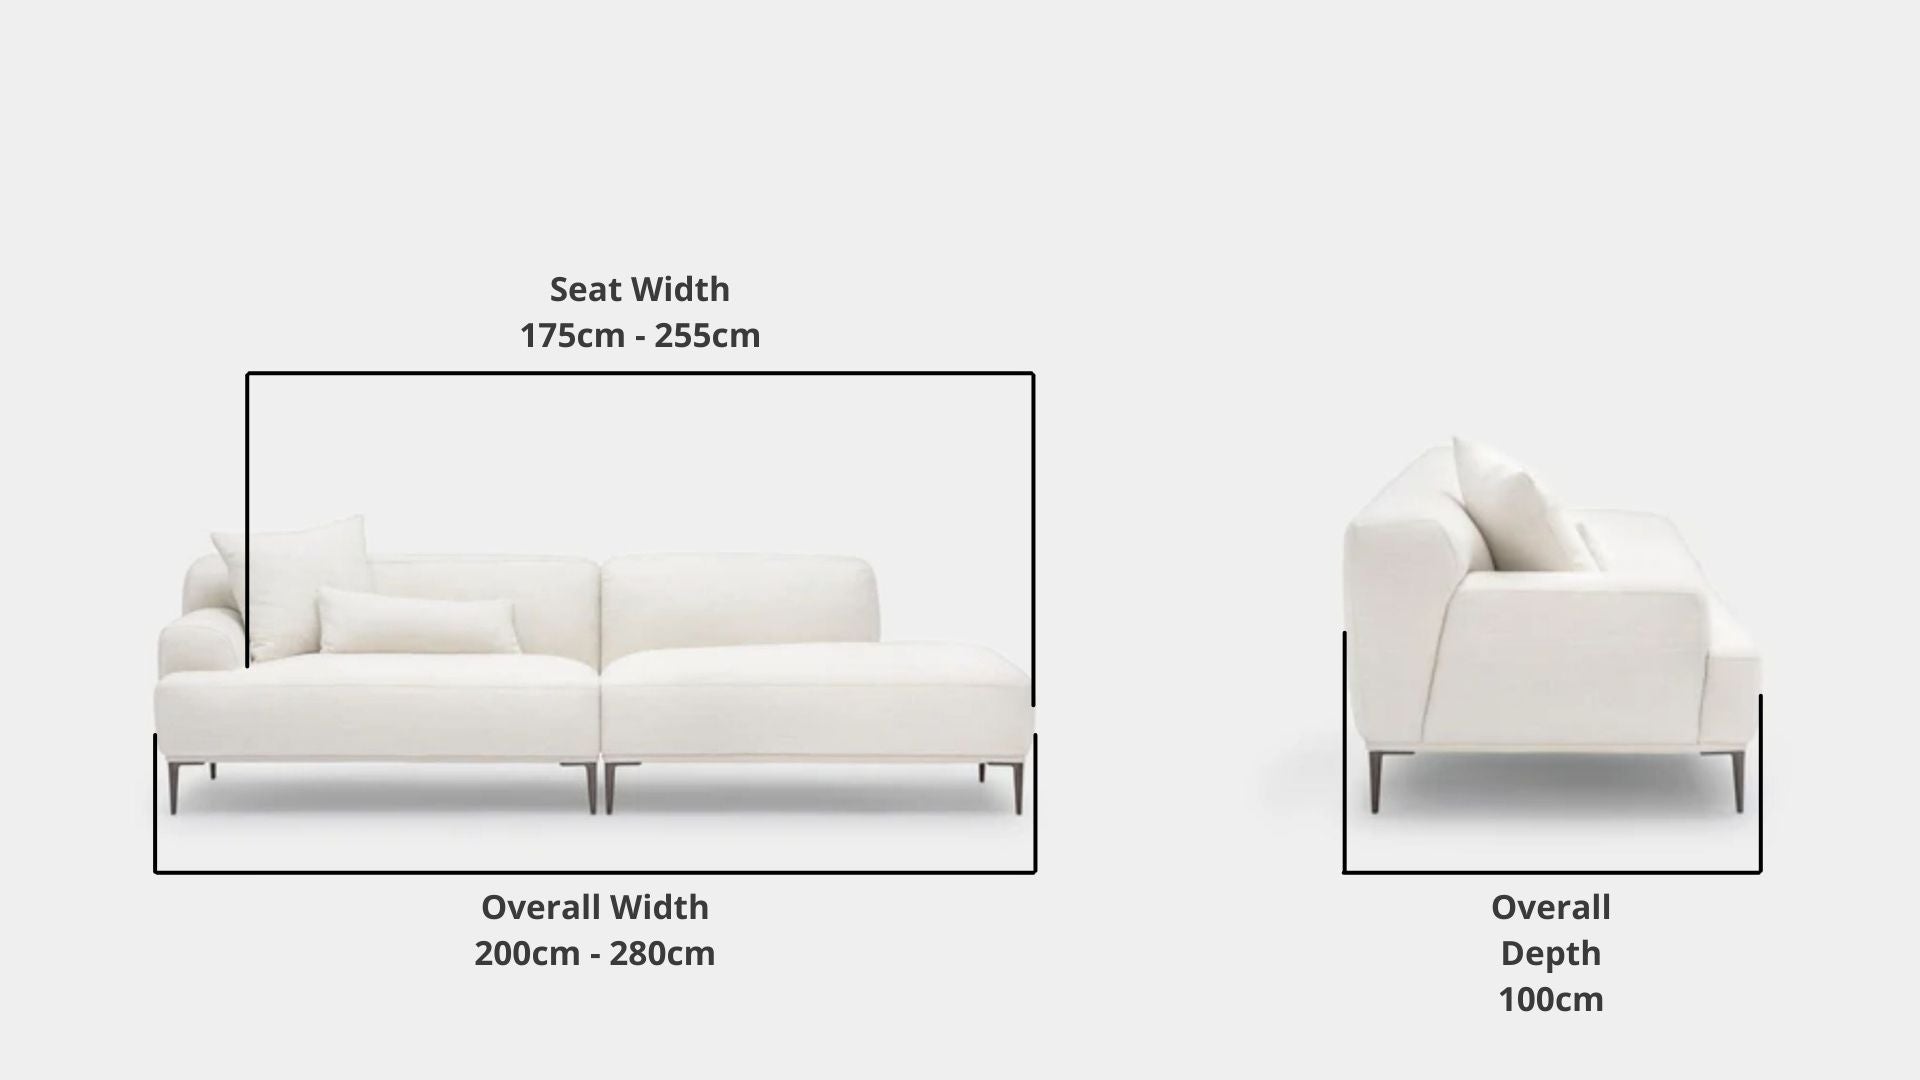 Details the key dimensions in terms of overall width, overall depth and seat width for Crystal Fabric One Arm Sofa